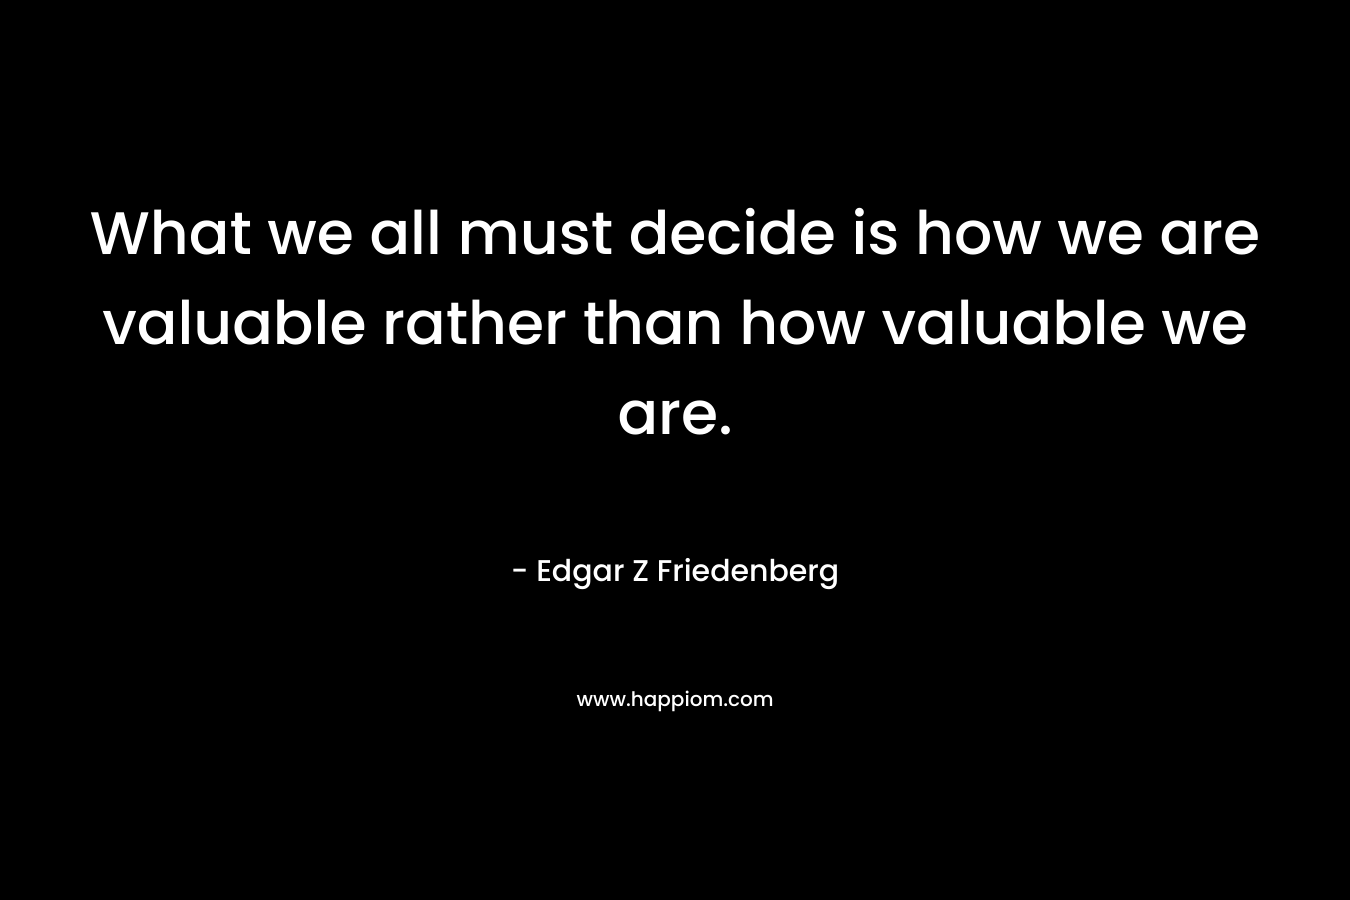 What we all must decide is how we are valuable rather than how valuable we are. – Edgar Z Friedenberg